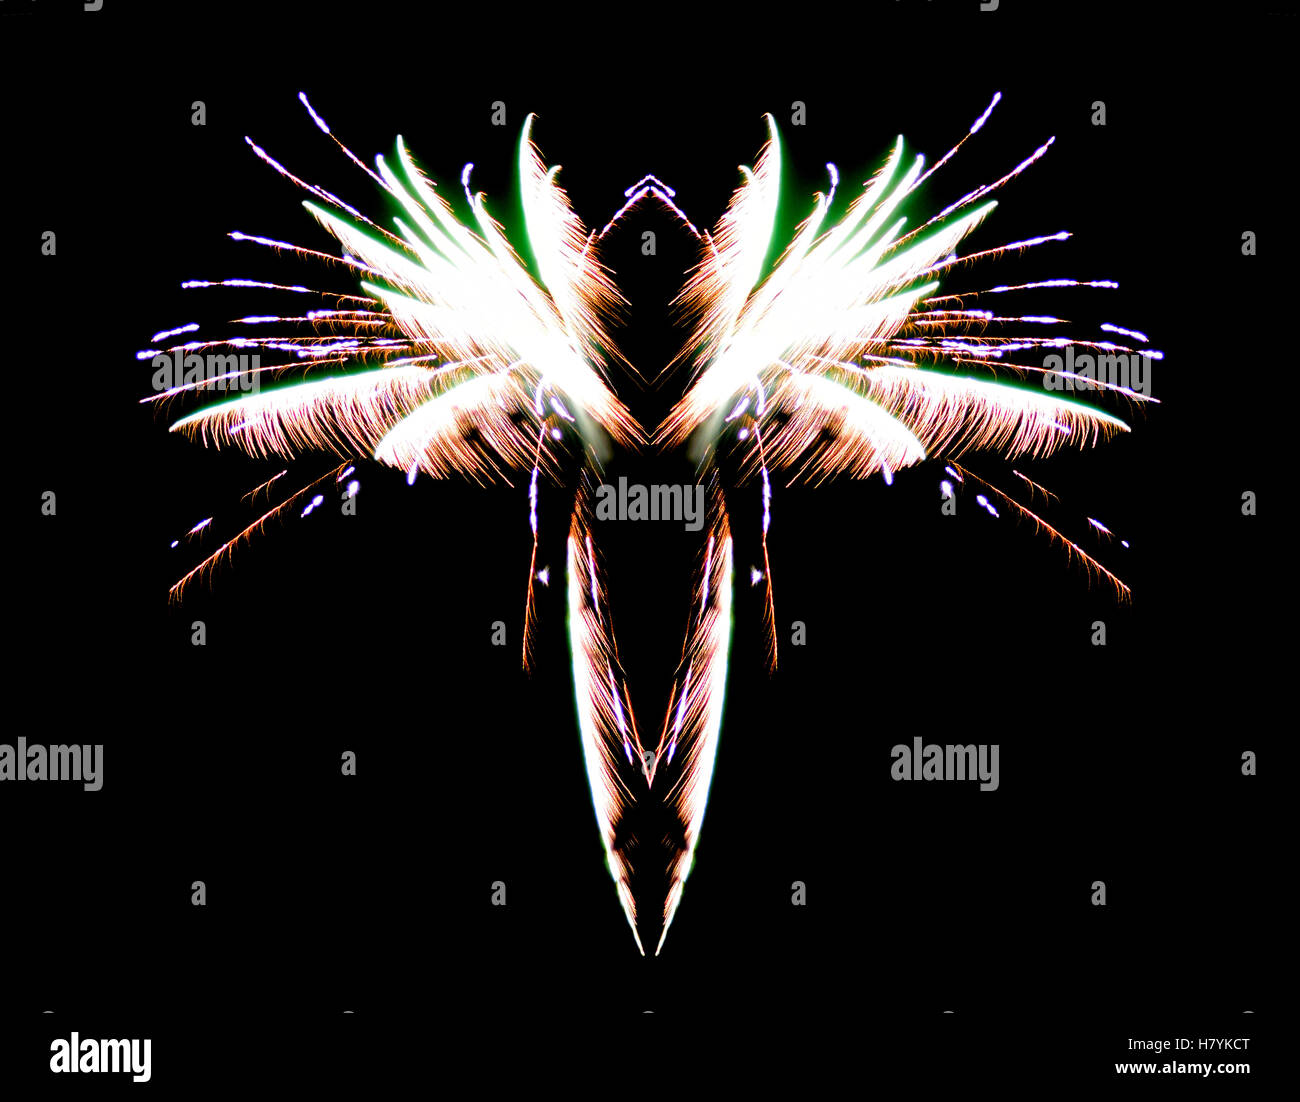 Firework insect - made by reflecting an image of exploding fireworks Stock Photo